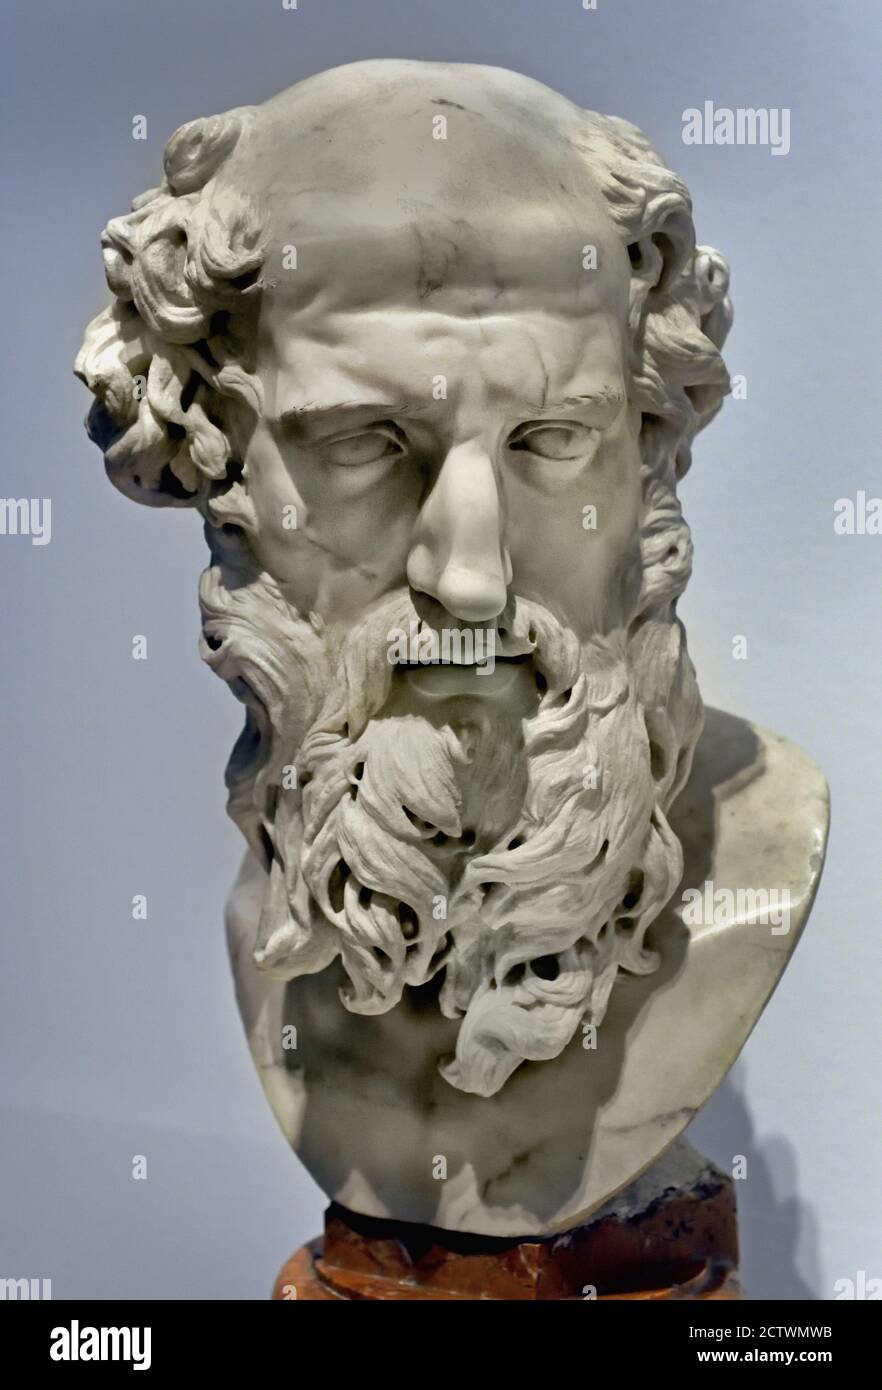 Plato 1635 by sculptor: Orfeo Boselli (attributed to) sculptor: François Du Quesnoy (rejected attribution) marble (rock)  Roman, Rome, Italy, Italian, ( Plato was an Athenian philosopher during the Classical period in Ancient Greece, founder of the Platonist school ) Stock Photo